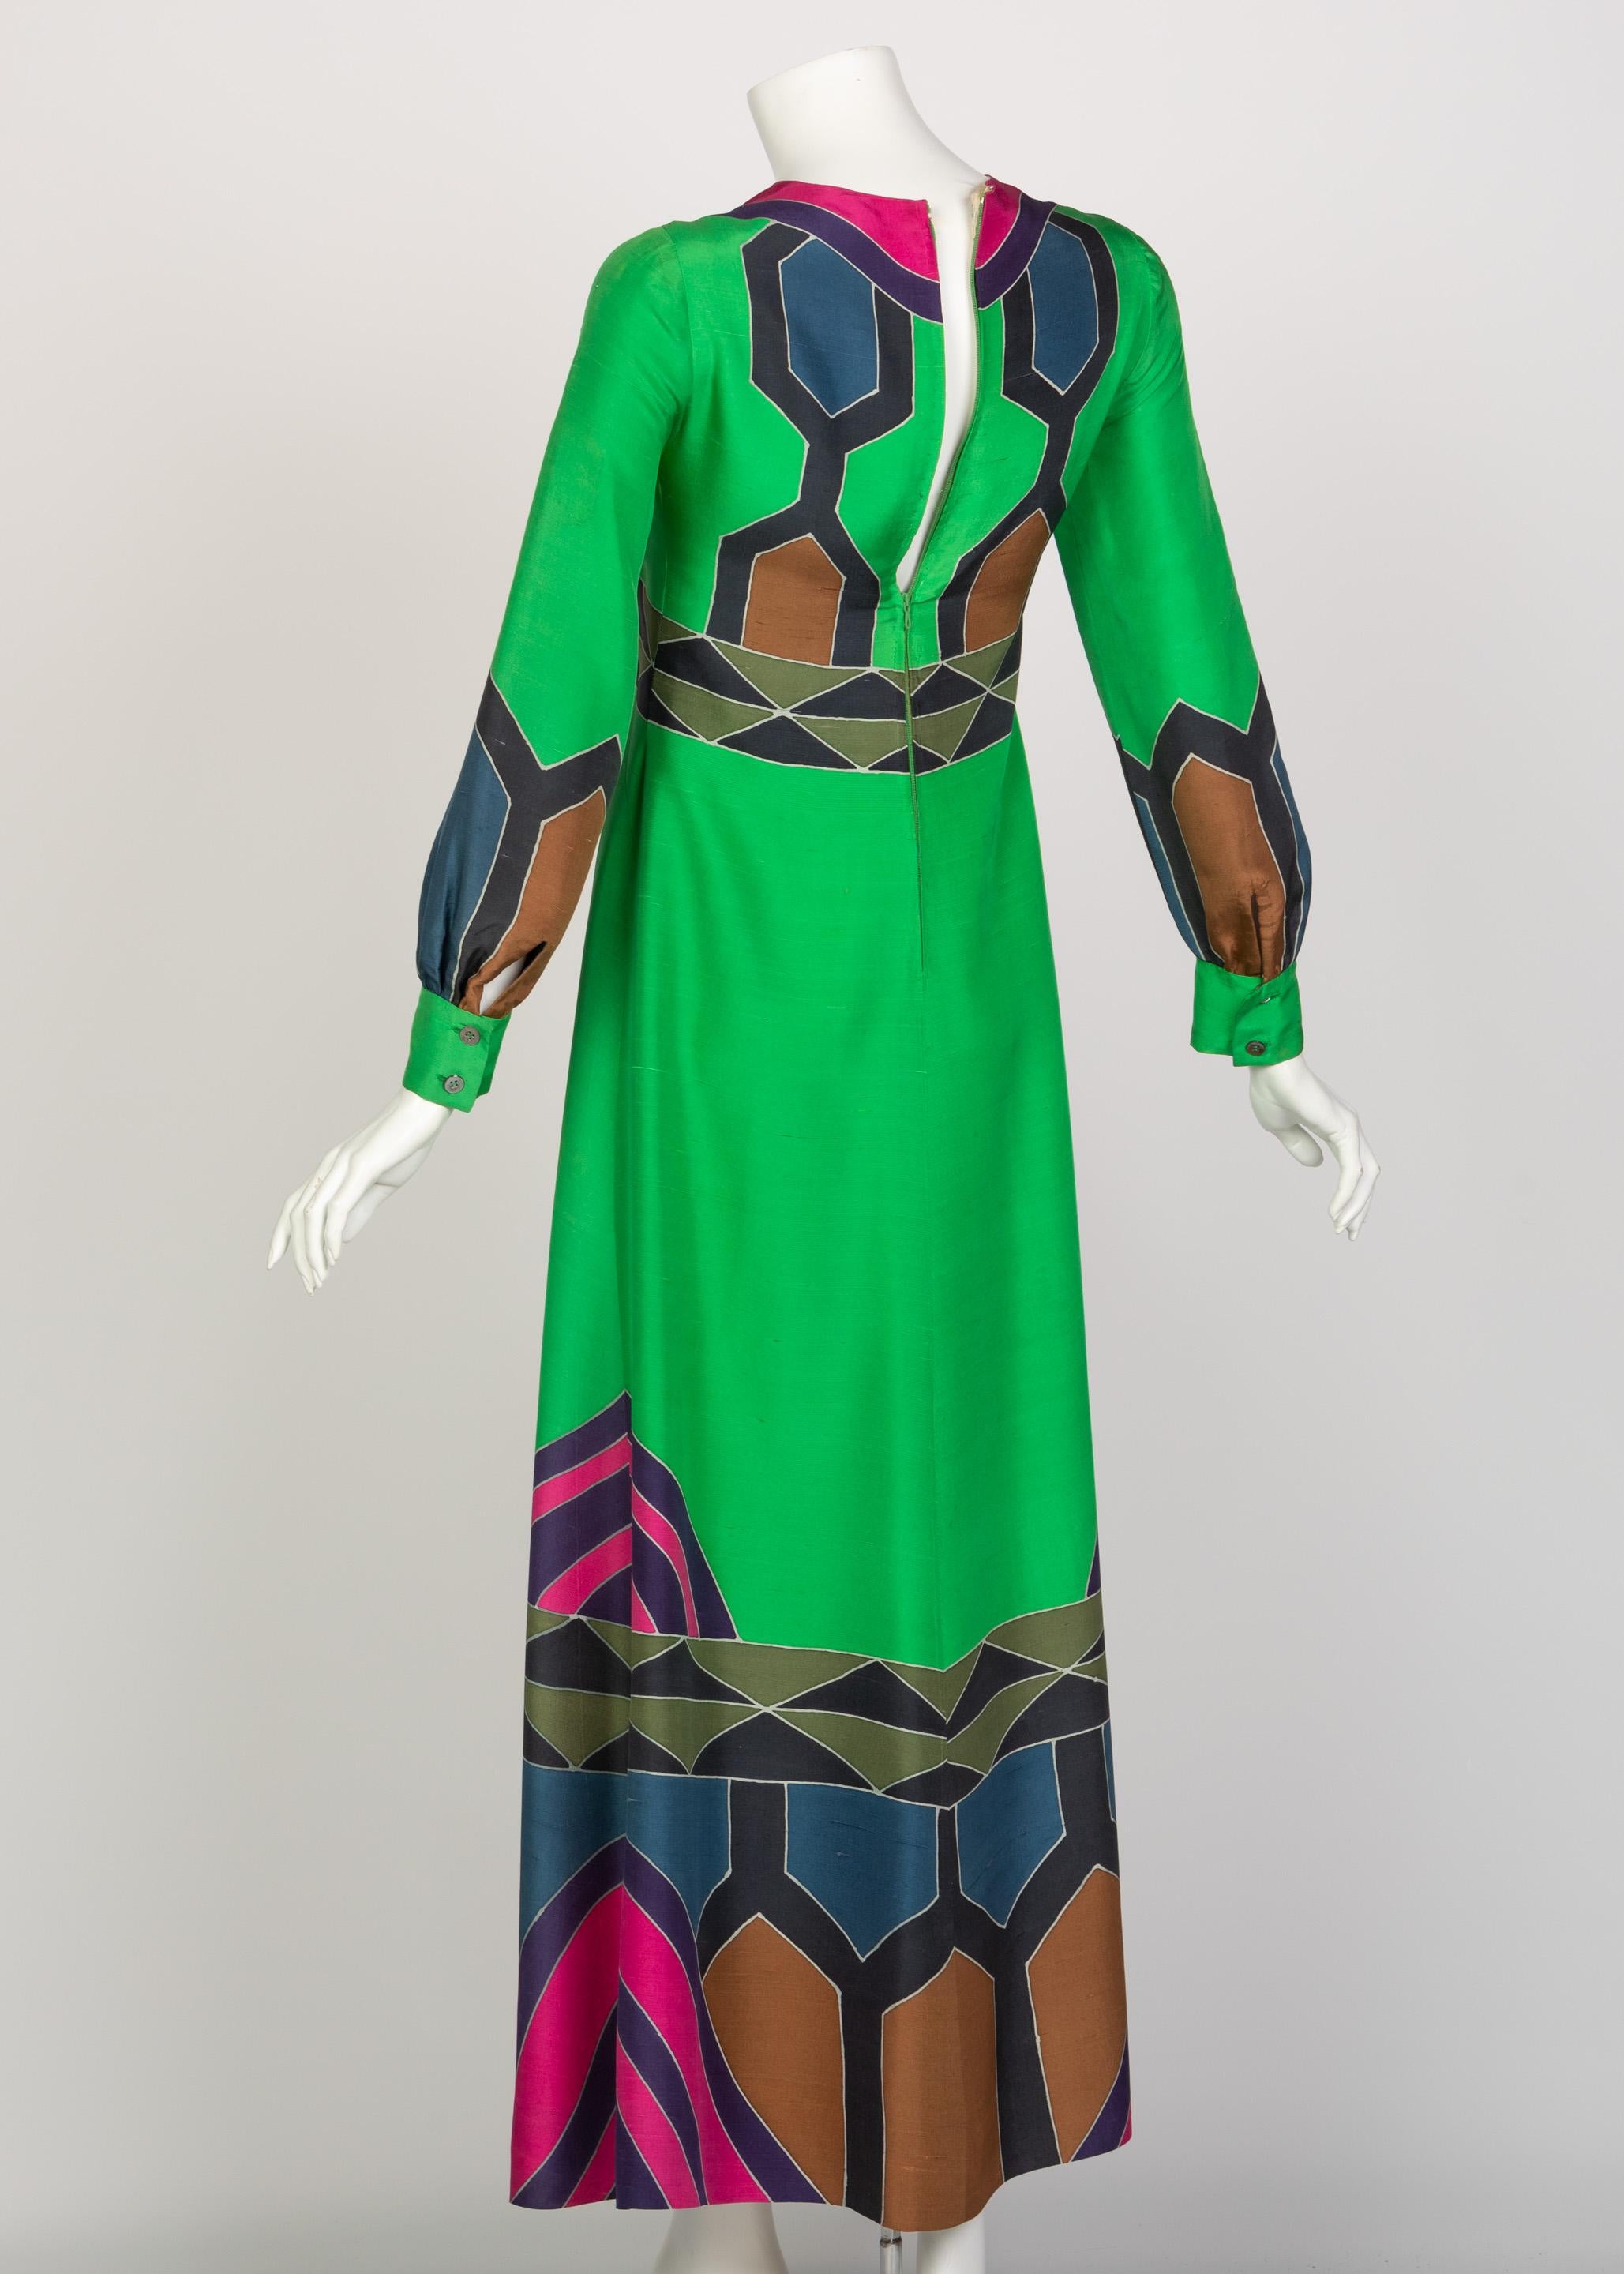 Nane French Couture Hand Painted Green Silk Maxi Dress, 1970s In Good Condition For Sale In Boca Raton, FL